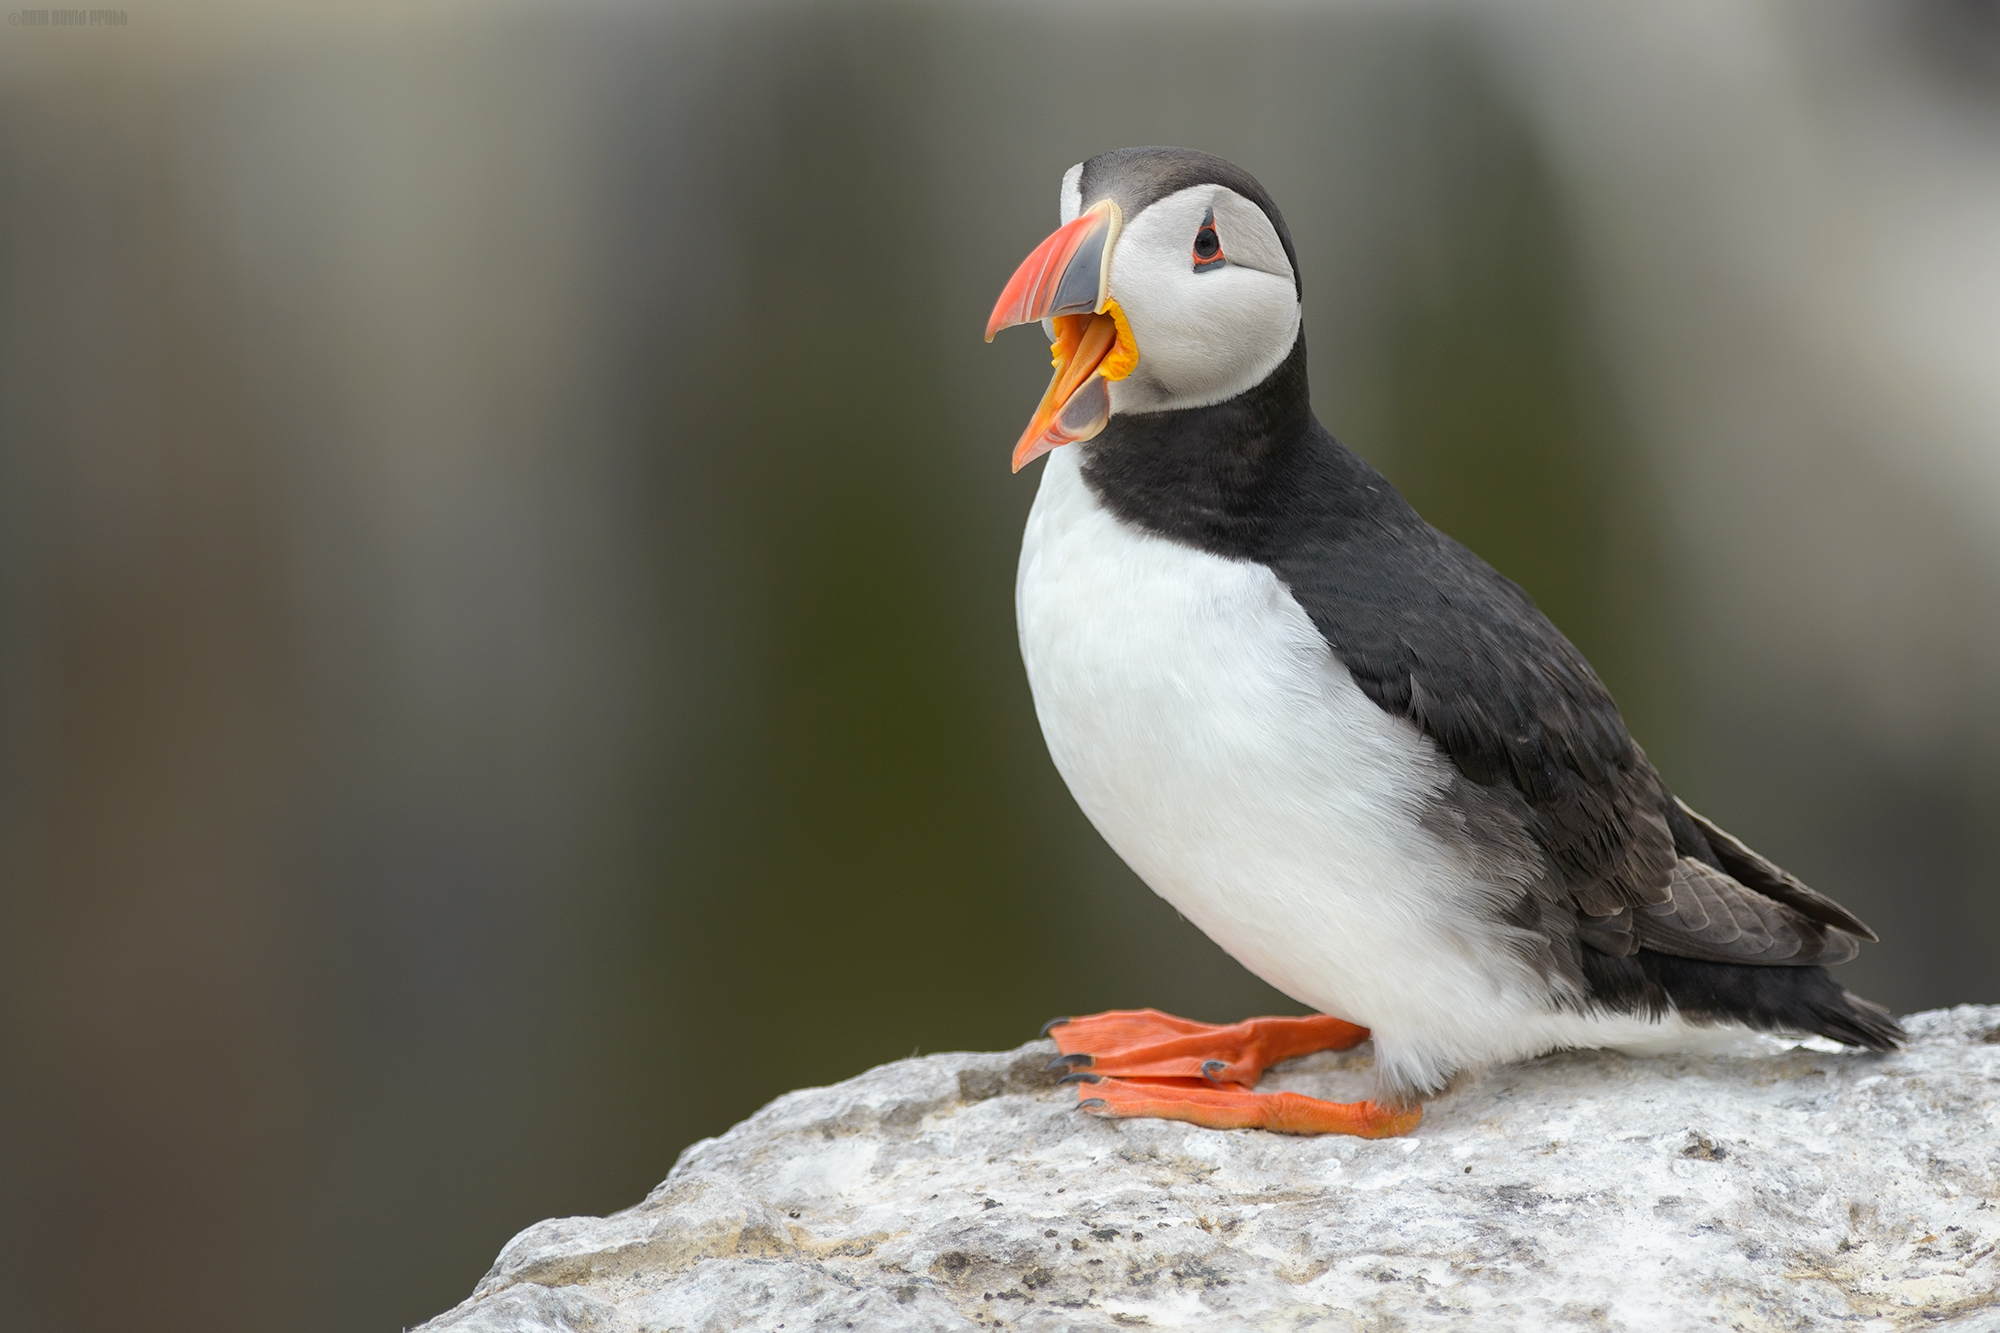 The Laughing Puffin